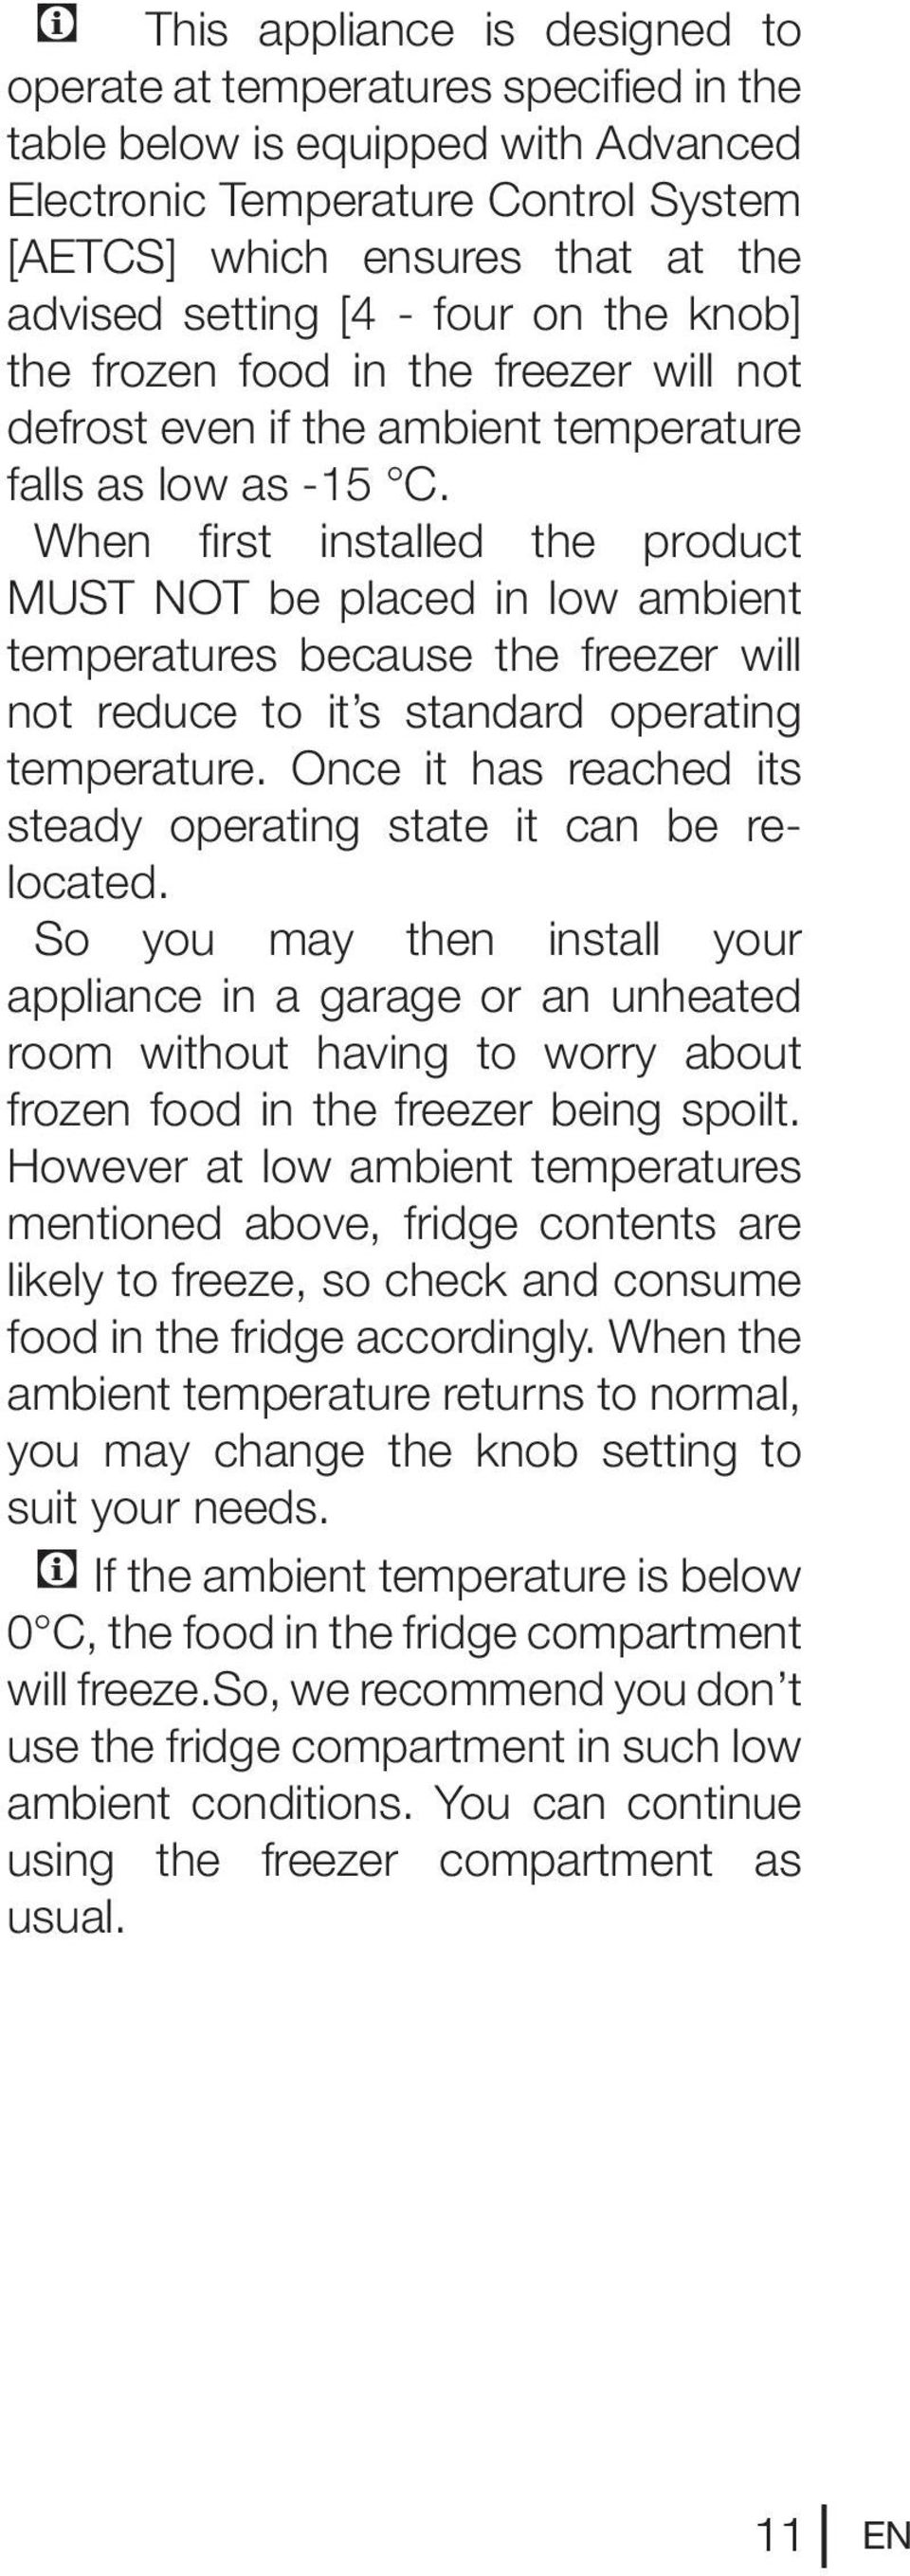 When first installed the product MUST NOT be placed in low ambient temperatures because the freezer will not reduce to it s standard operating temperature.